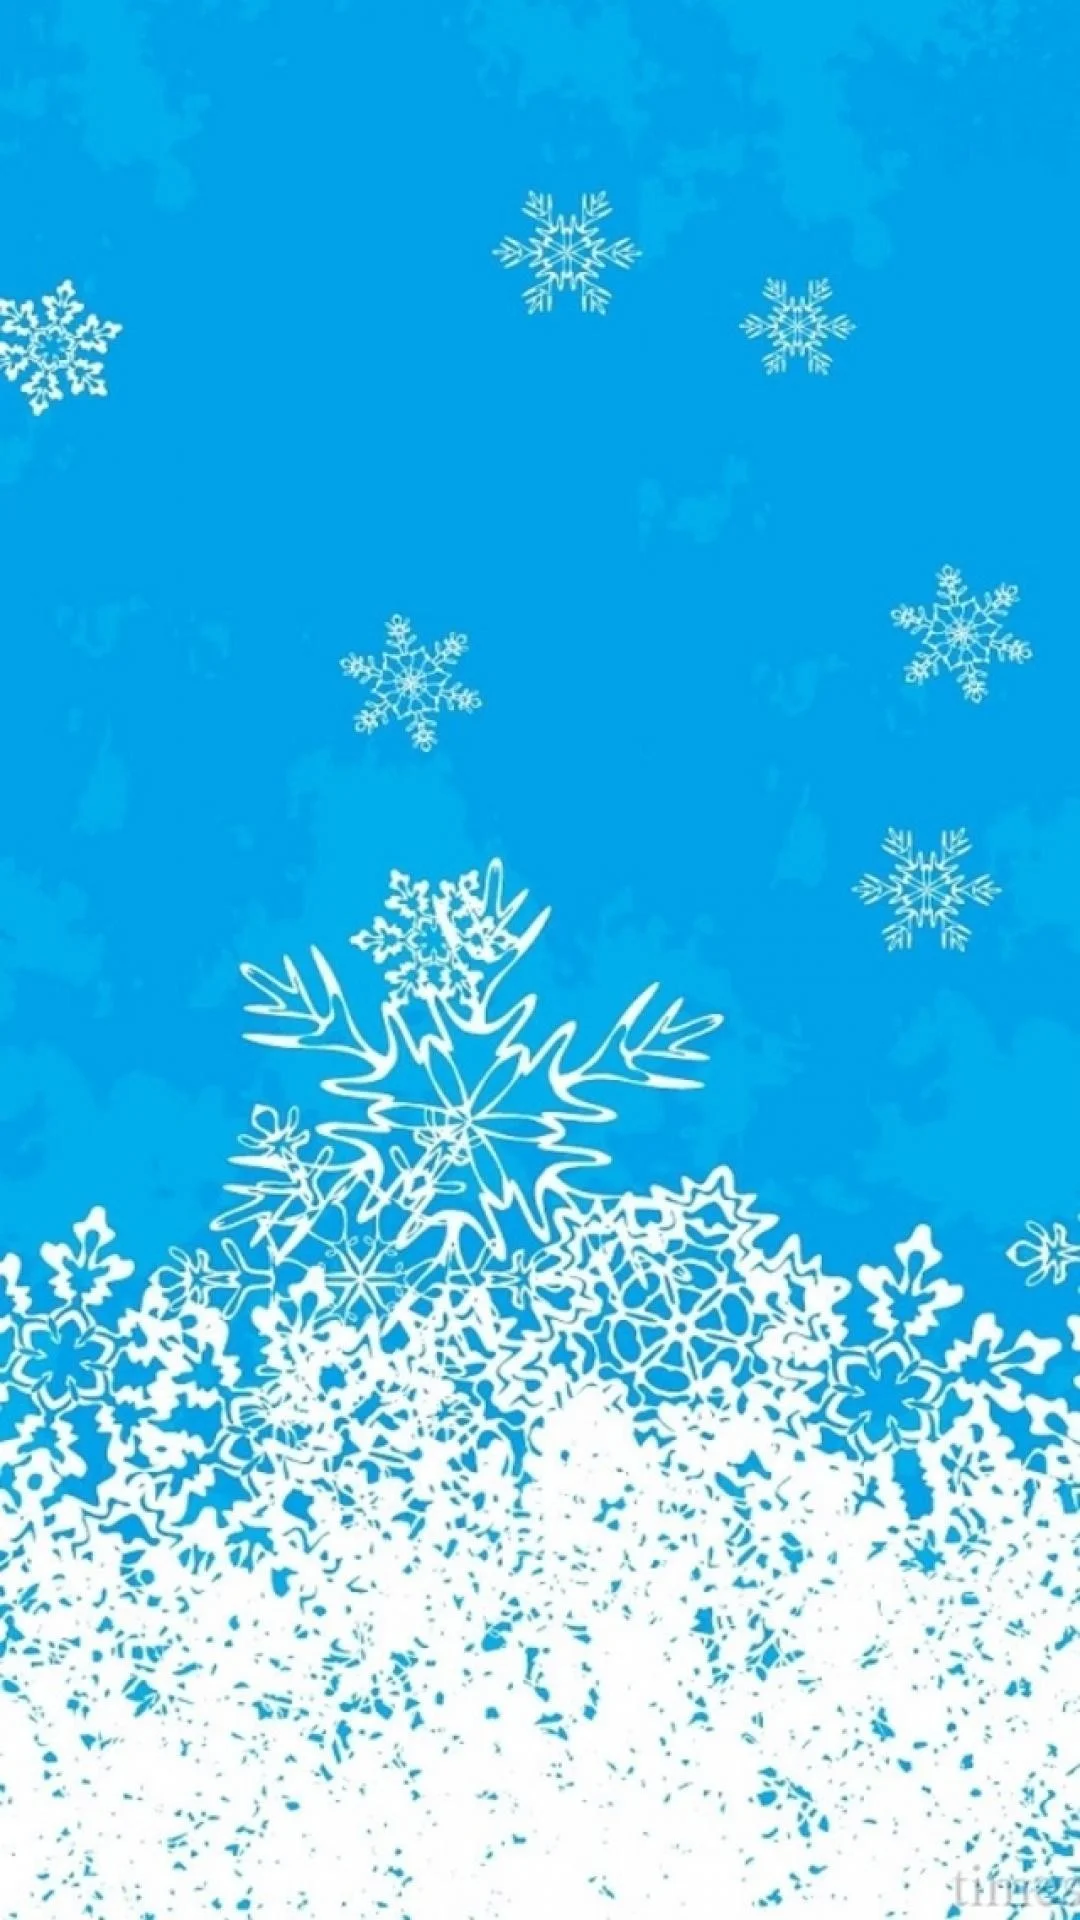 Merry Christmas Snowflake Background iPhone 8 wallpaper